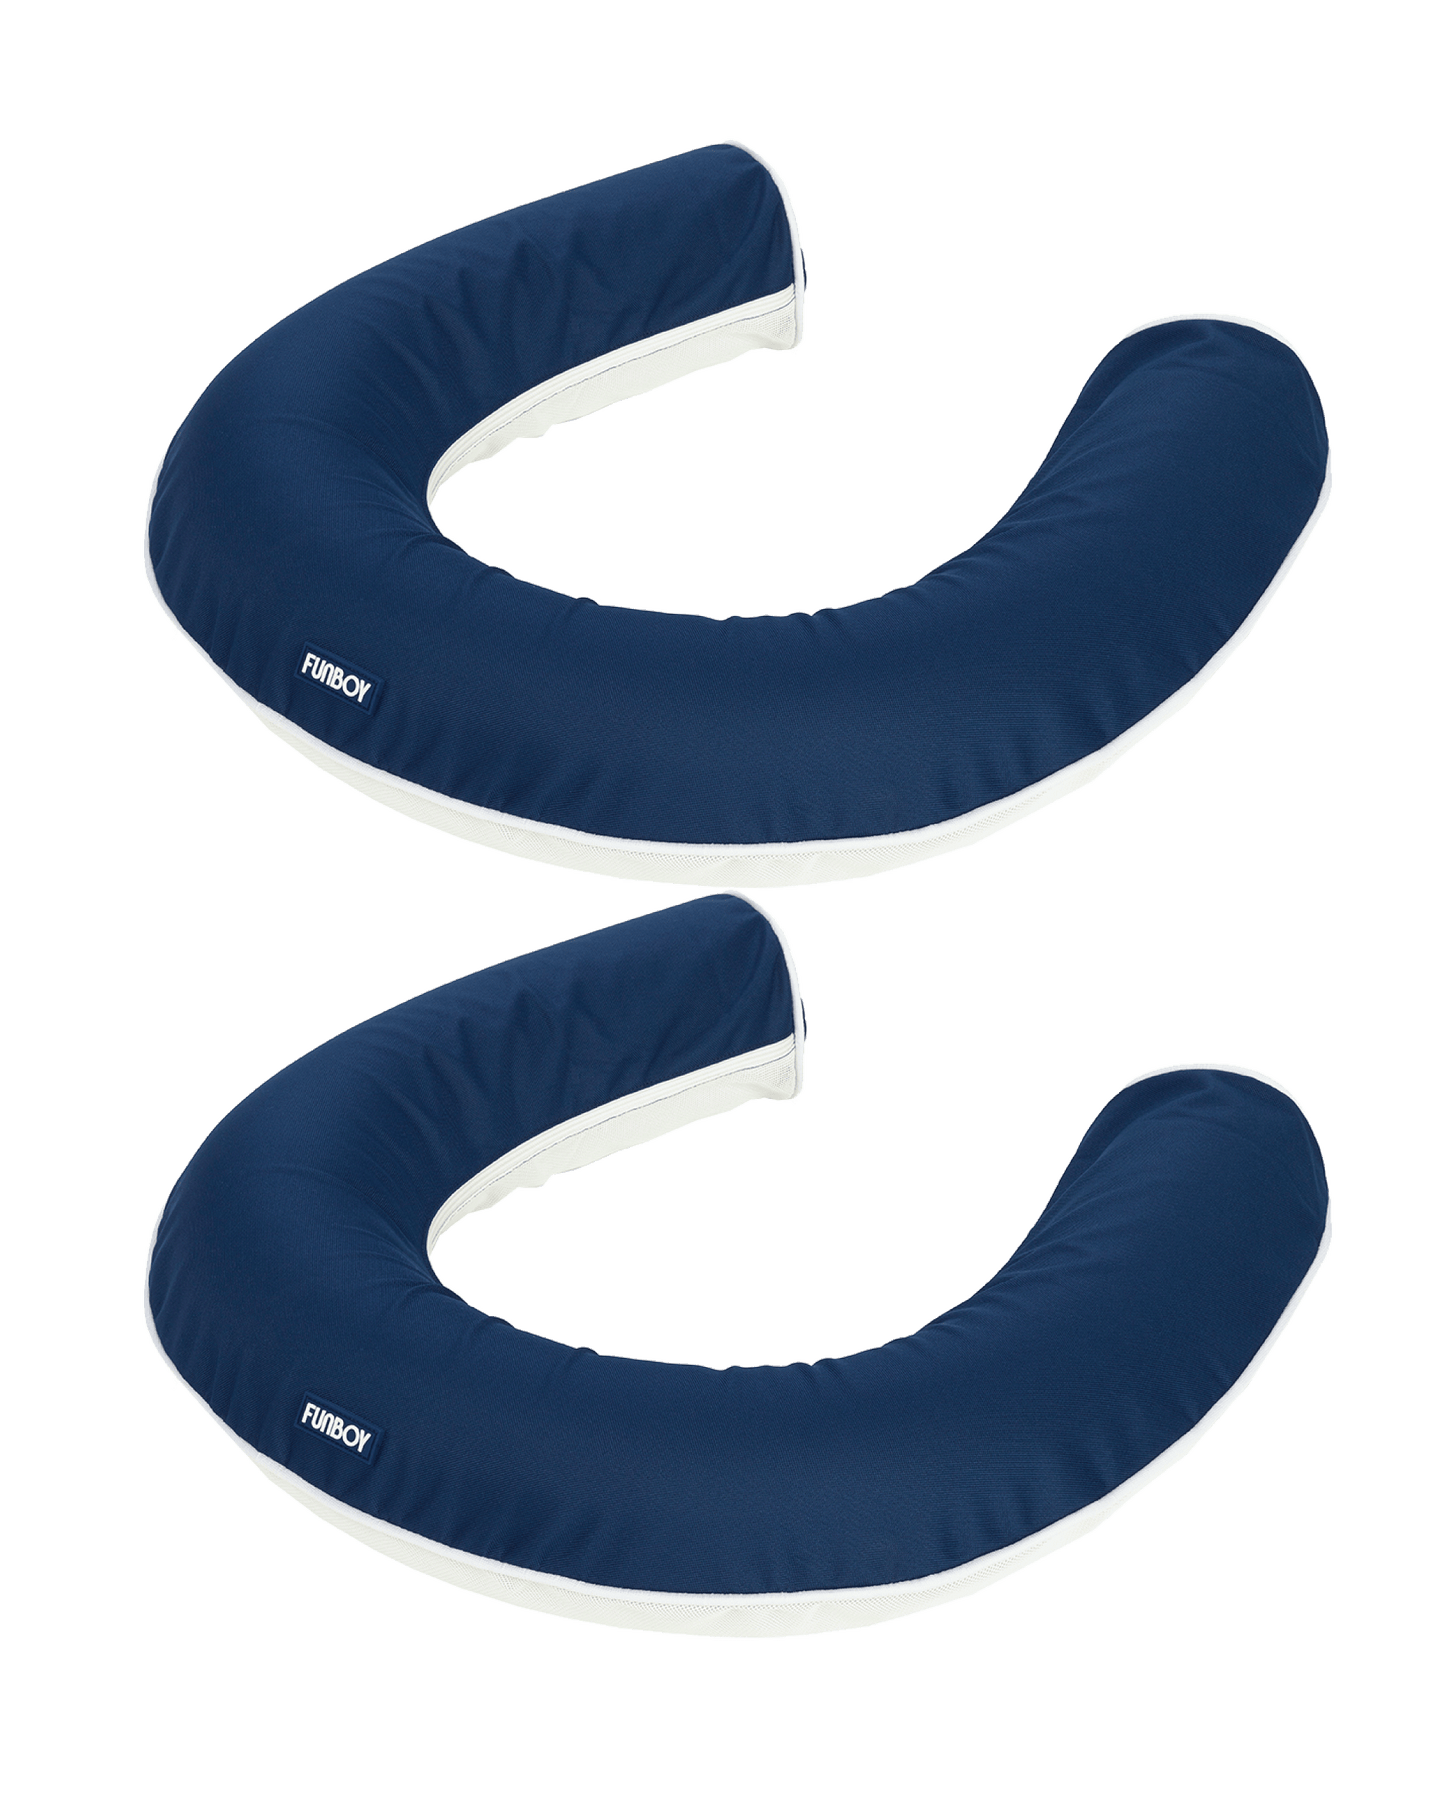 Navy Fabric Noodle Float - 2 Pack